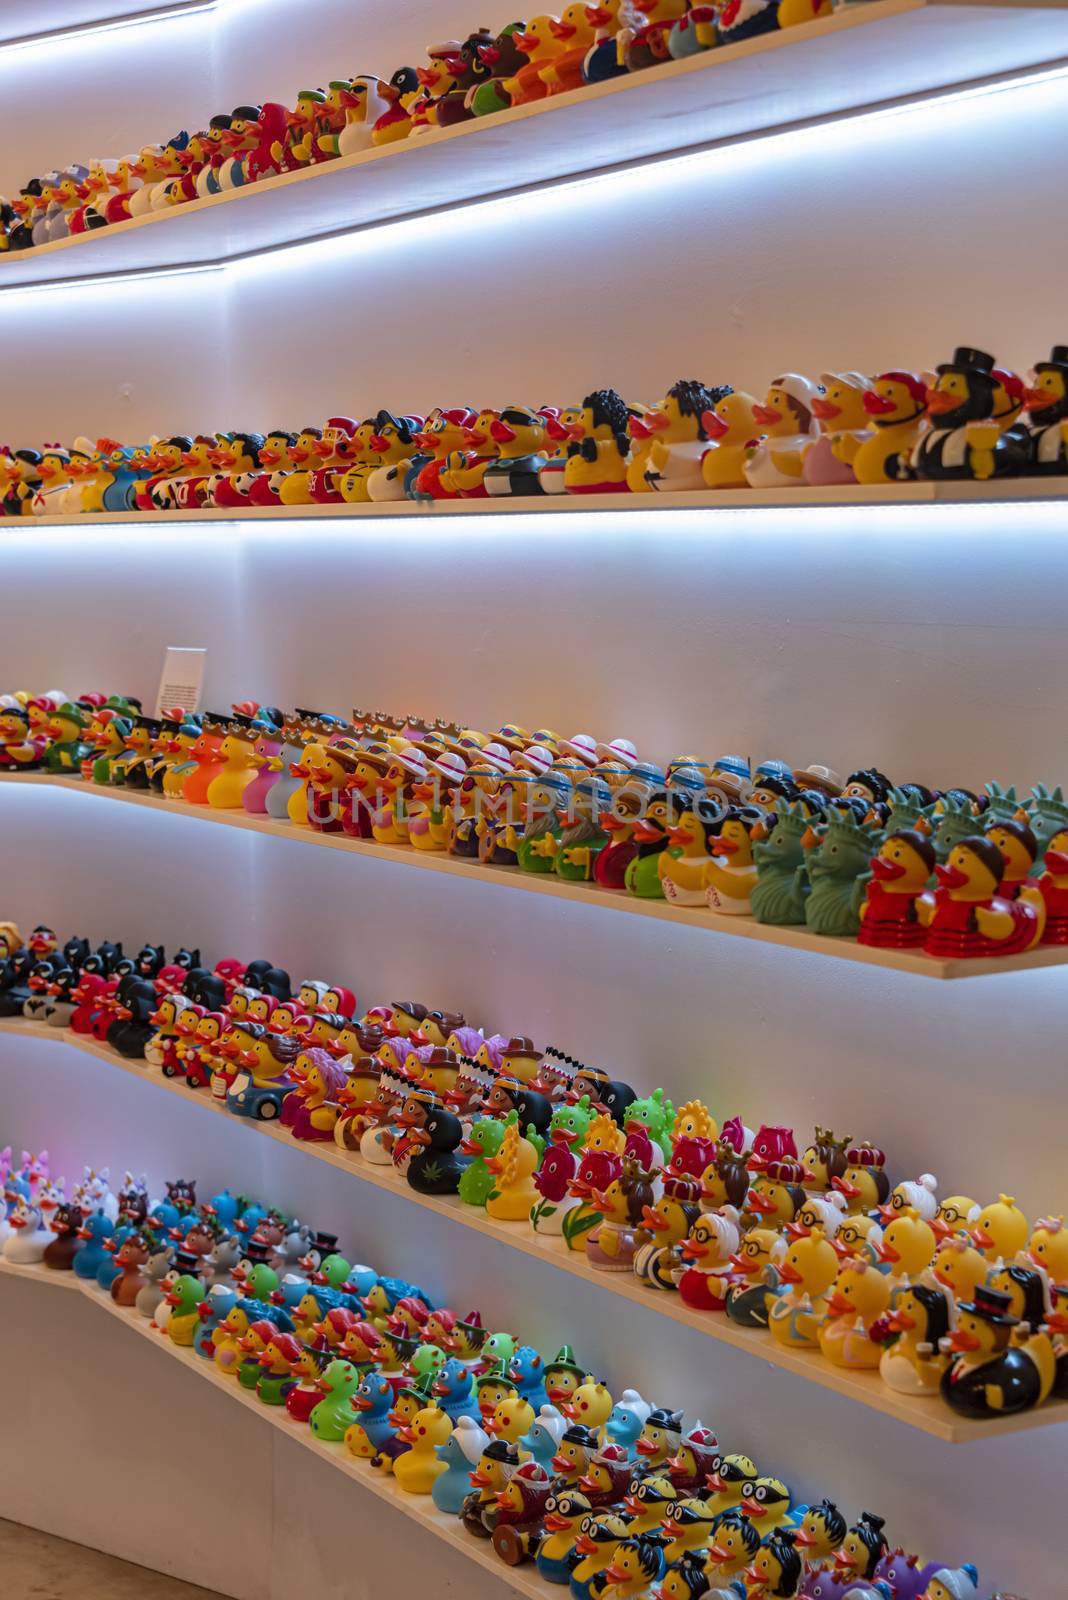 ES, Barcelona Duck Store - June 2018: Rubber ducks with a difference.